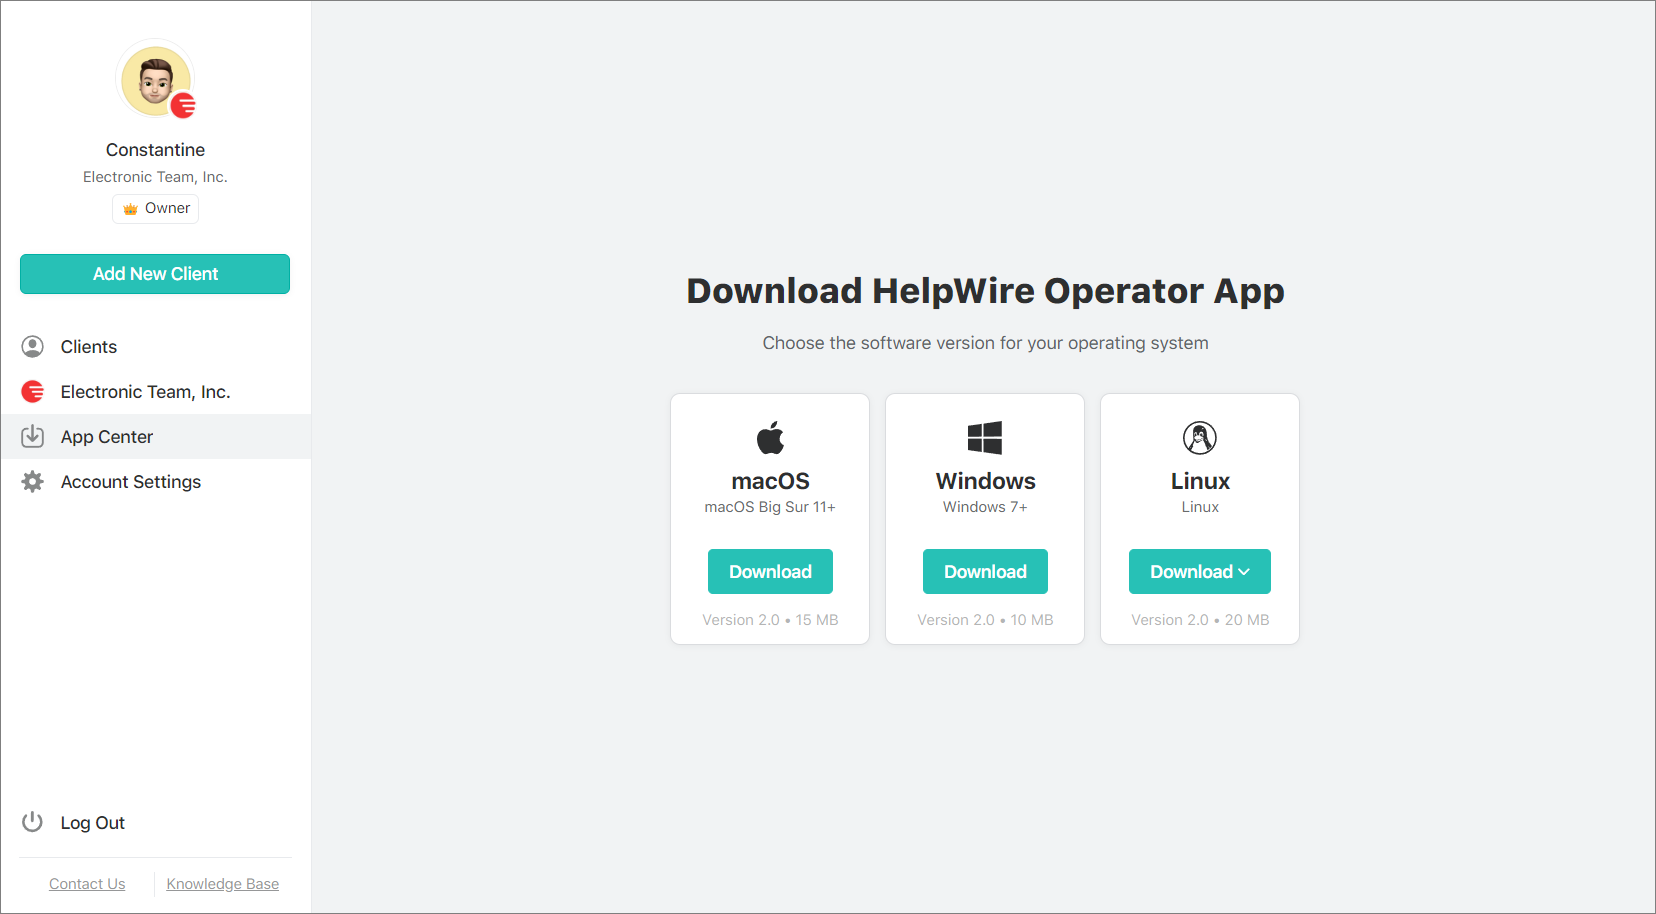 Download Center for Operator in HelpWire